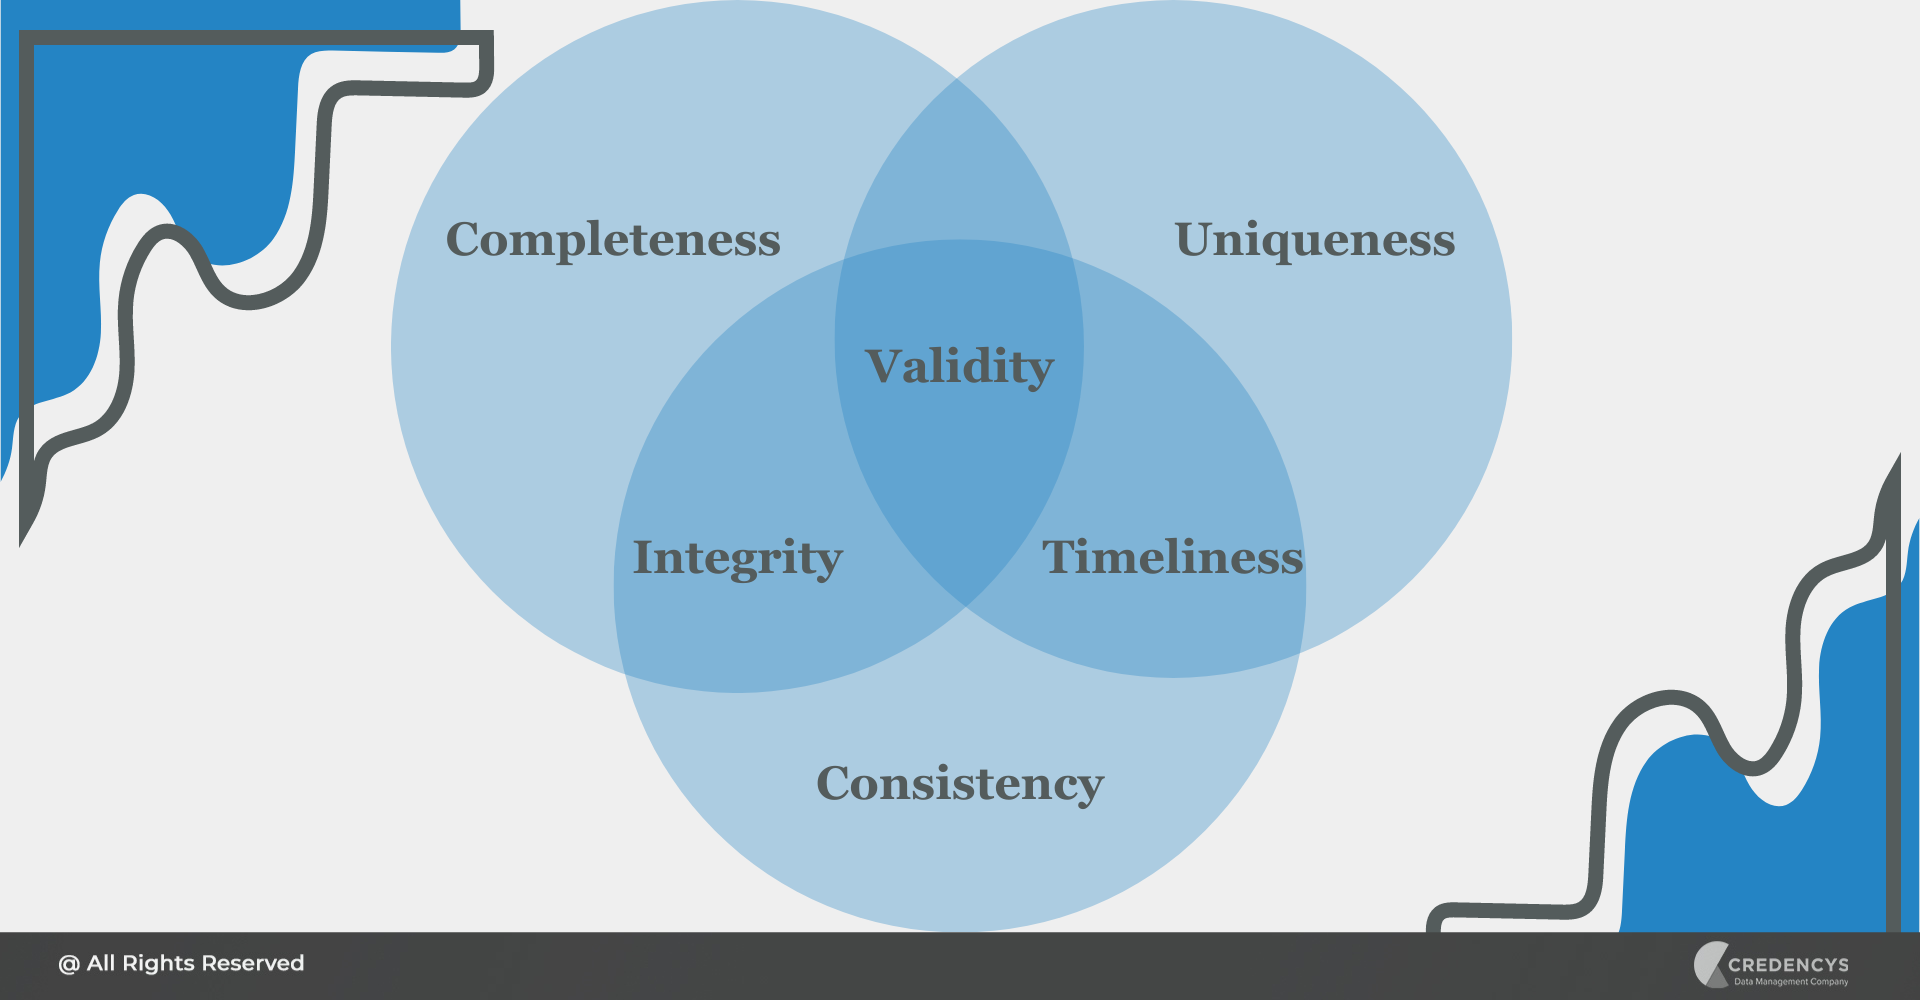 Dimensions of Data Quality